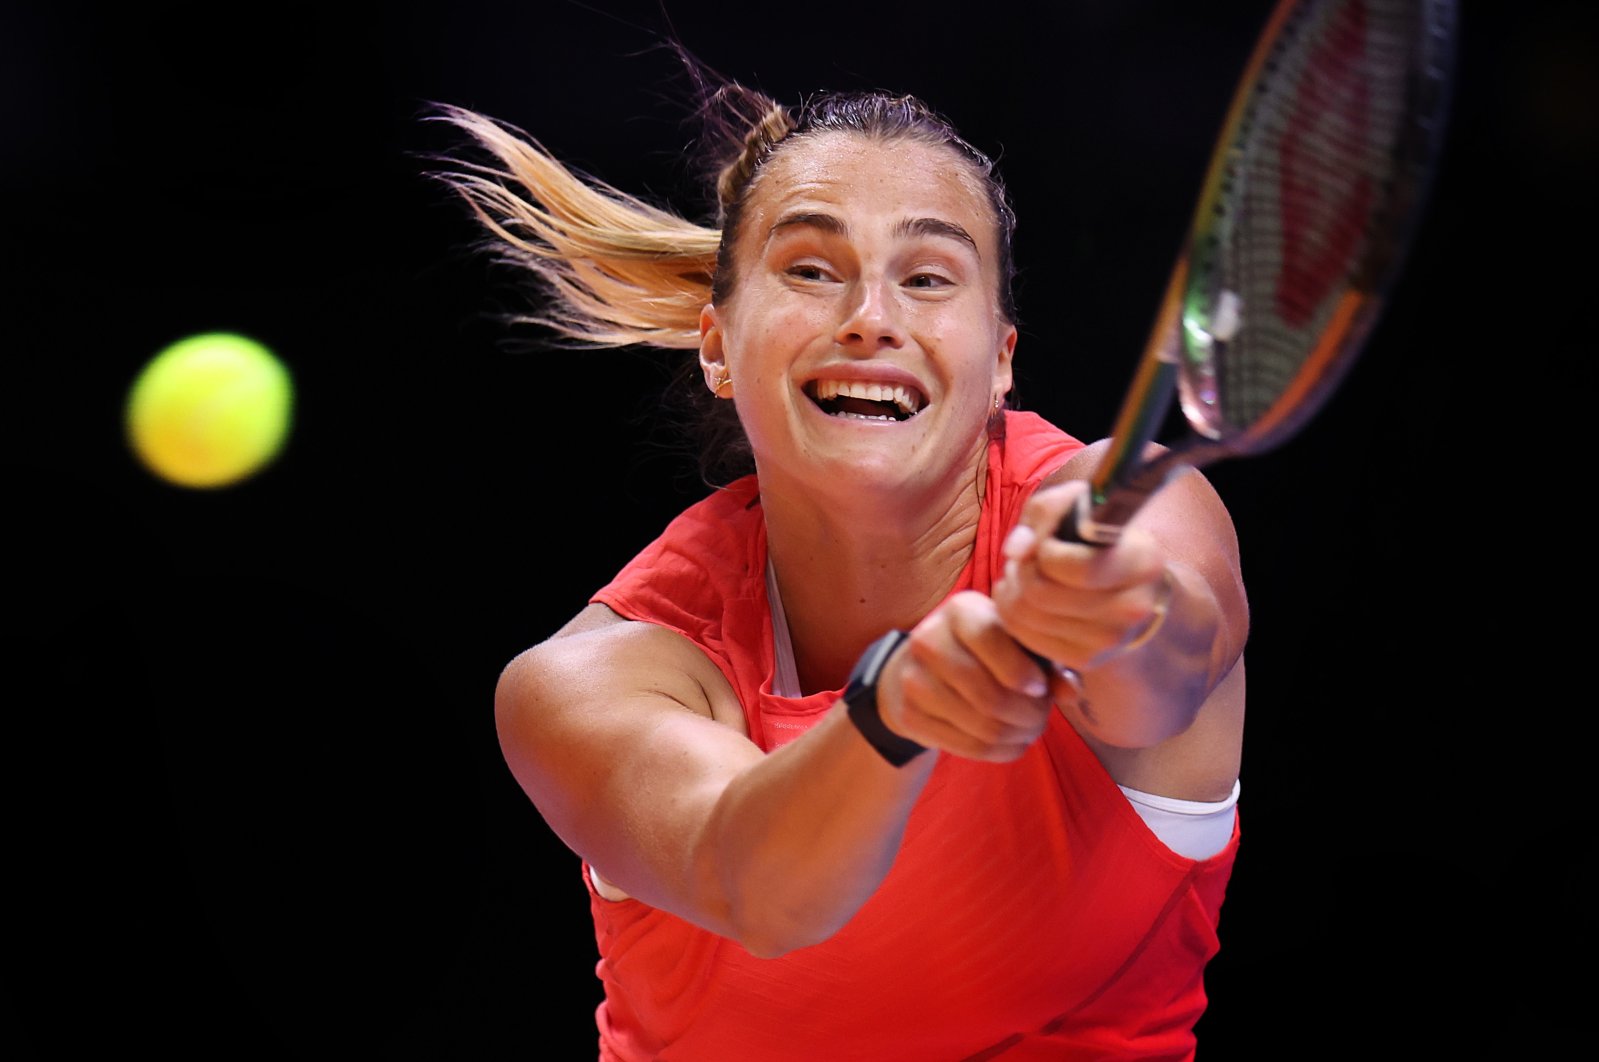 Aryna Sabalenka of the Falcons plays a backhand against Elena Rybakina of the Hawks during day two of the World Tennis League at Coca-Cola Arena, Dubai, United Arab Emirates, Dec. 20, 2022. (Getty Images Photo)